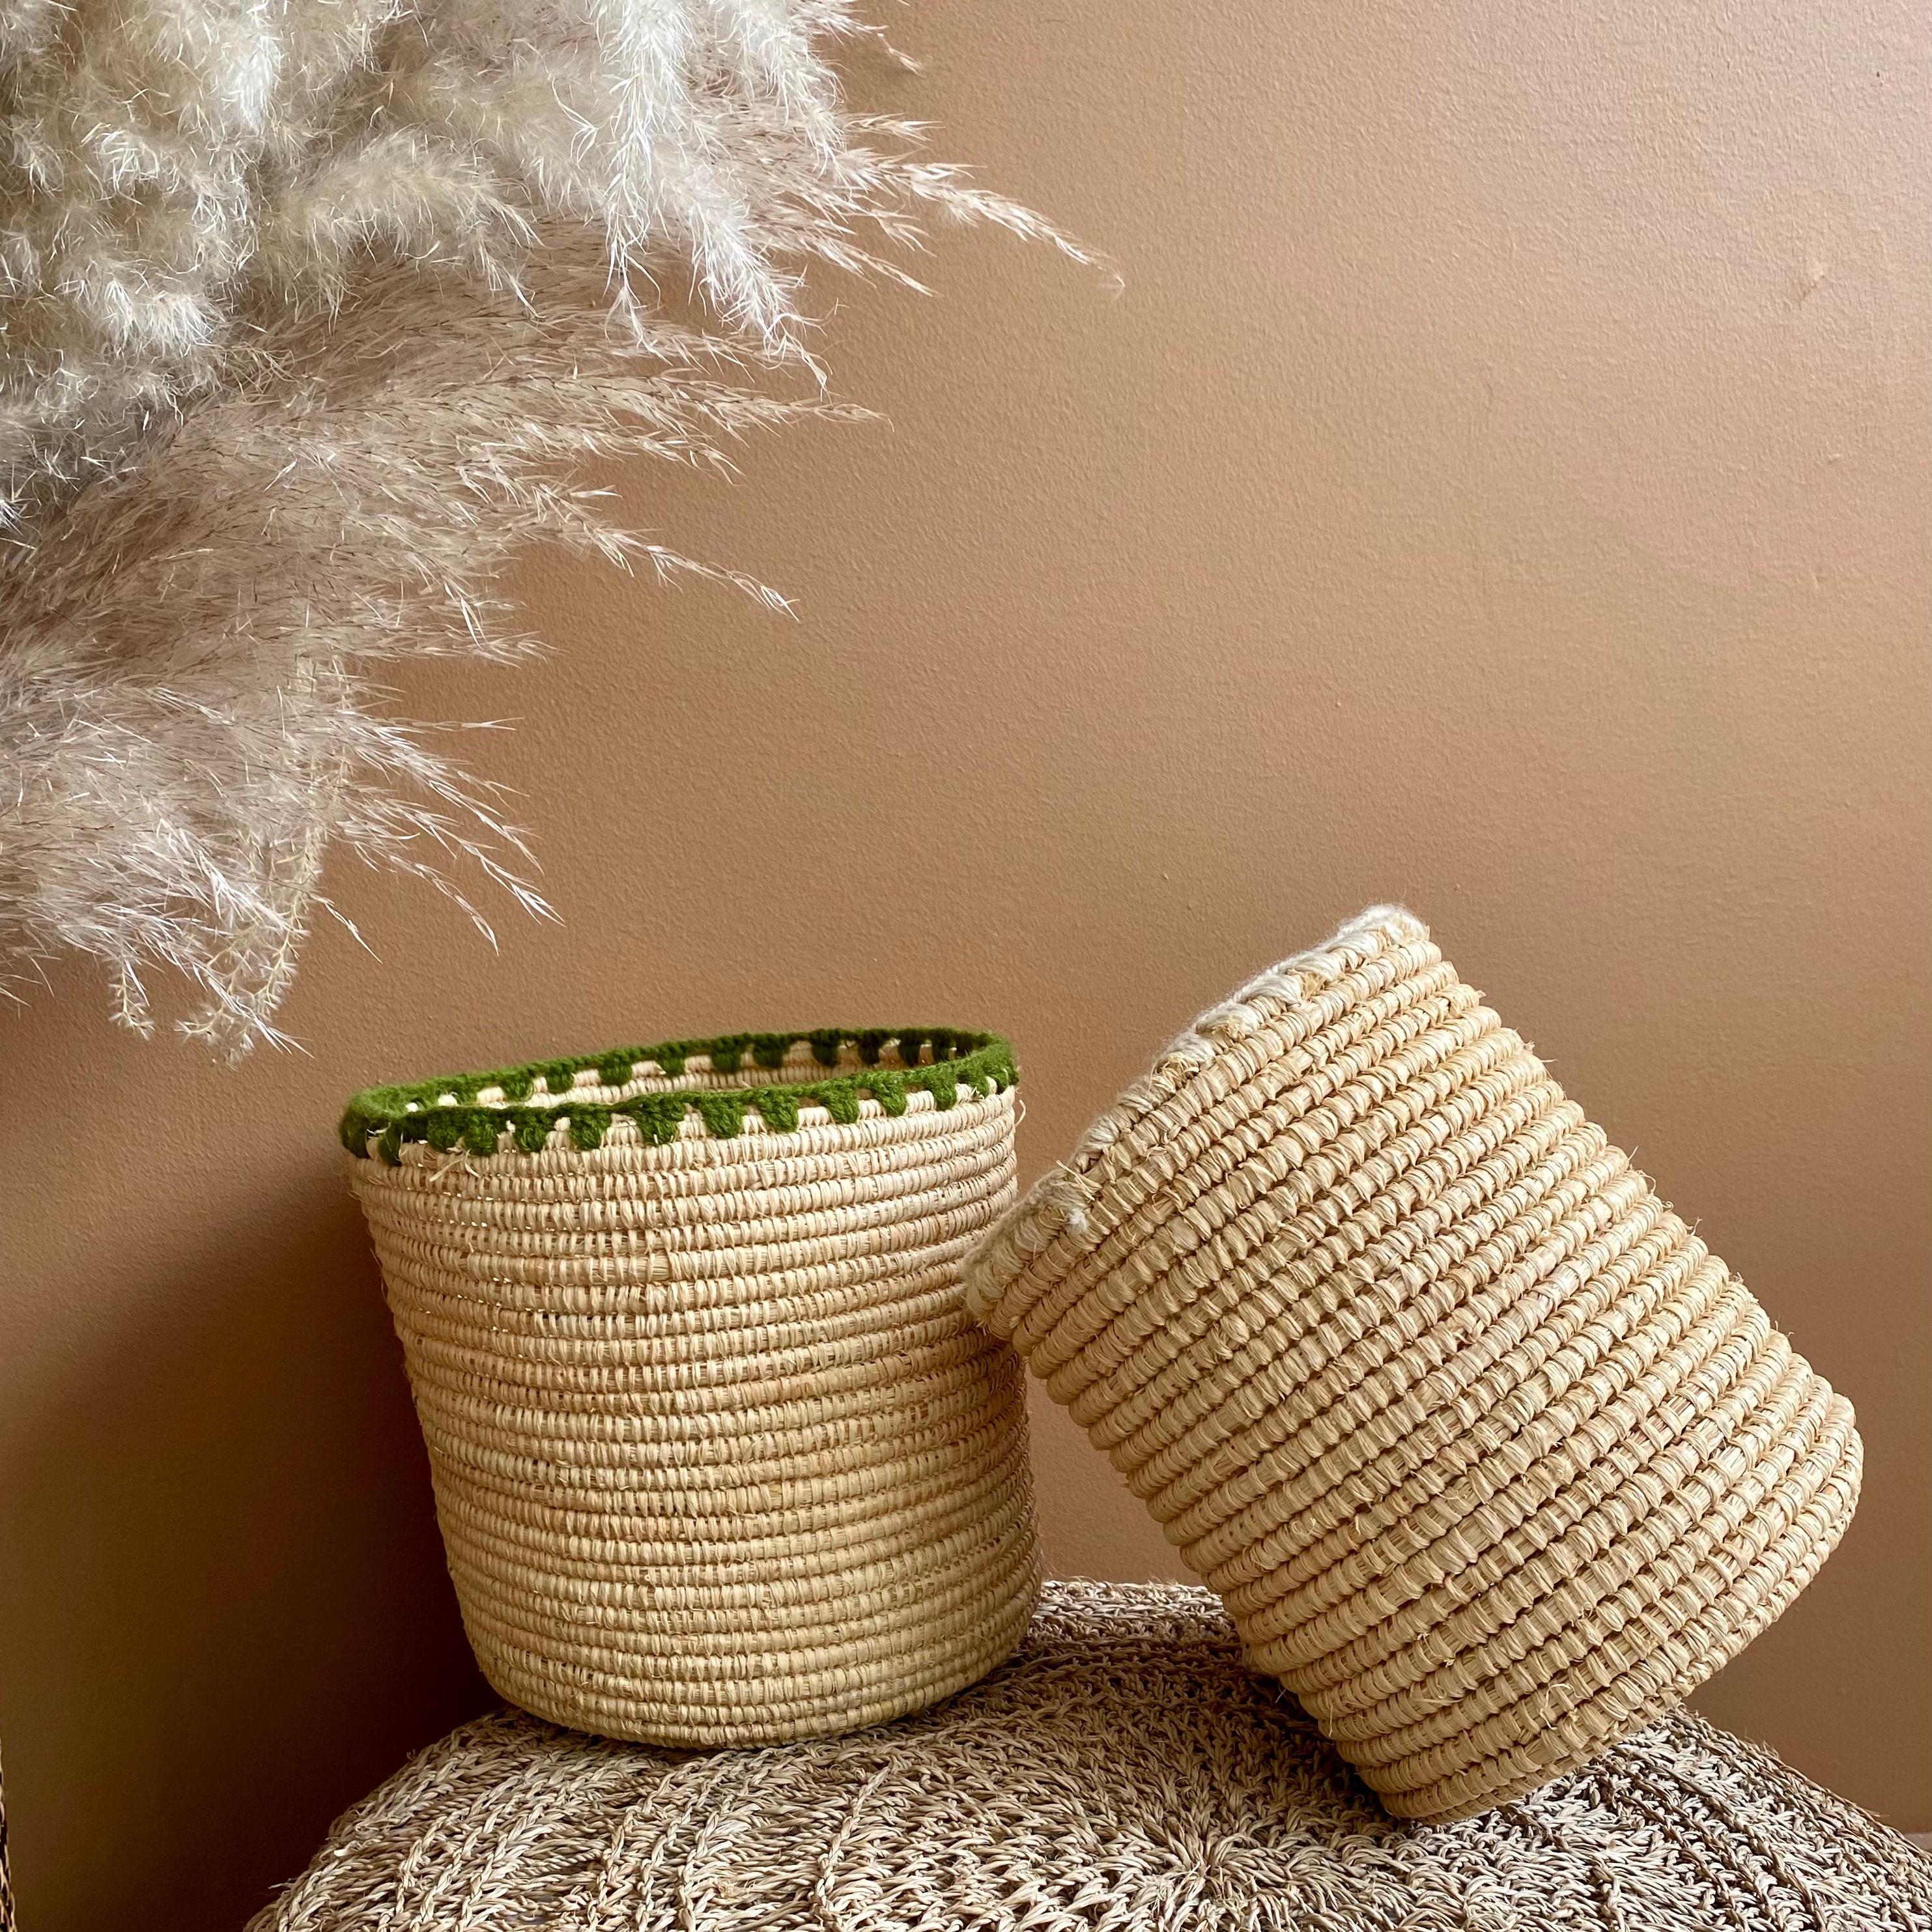 About Bonjour Coco's Handmade Baskets